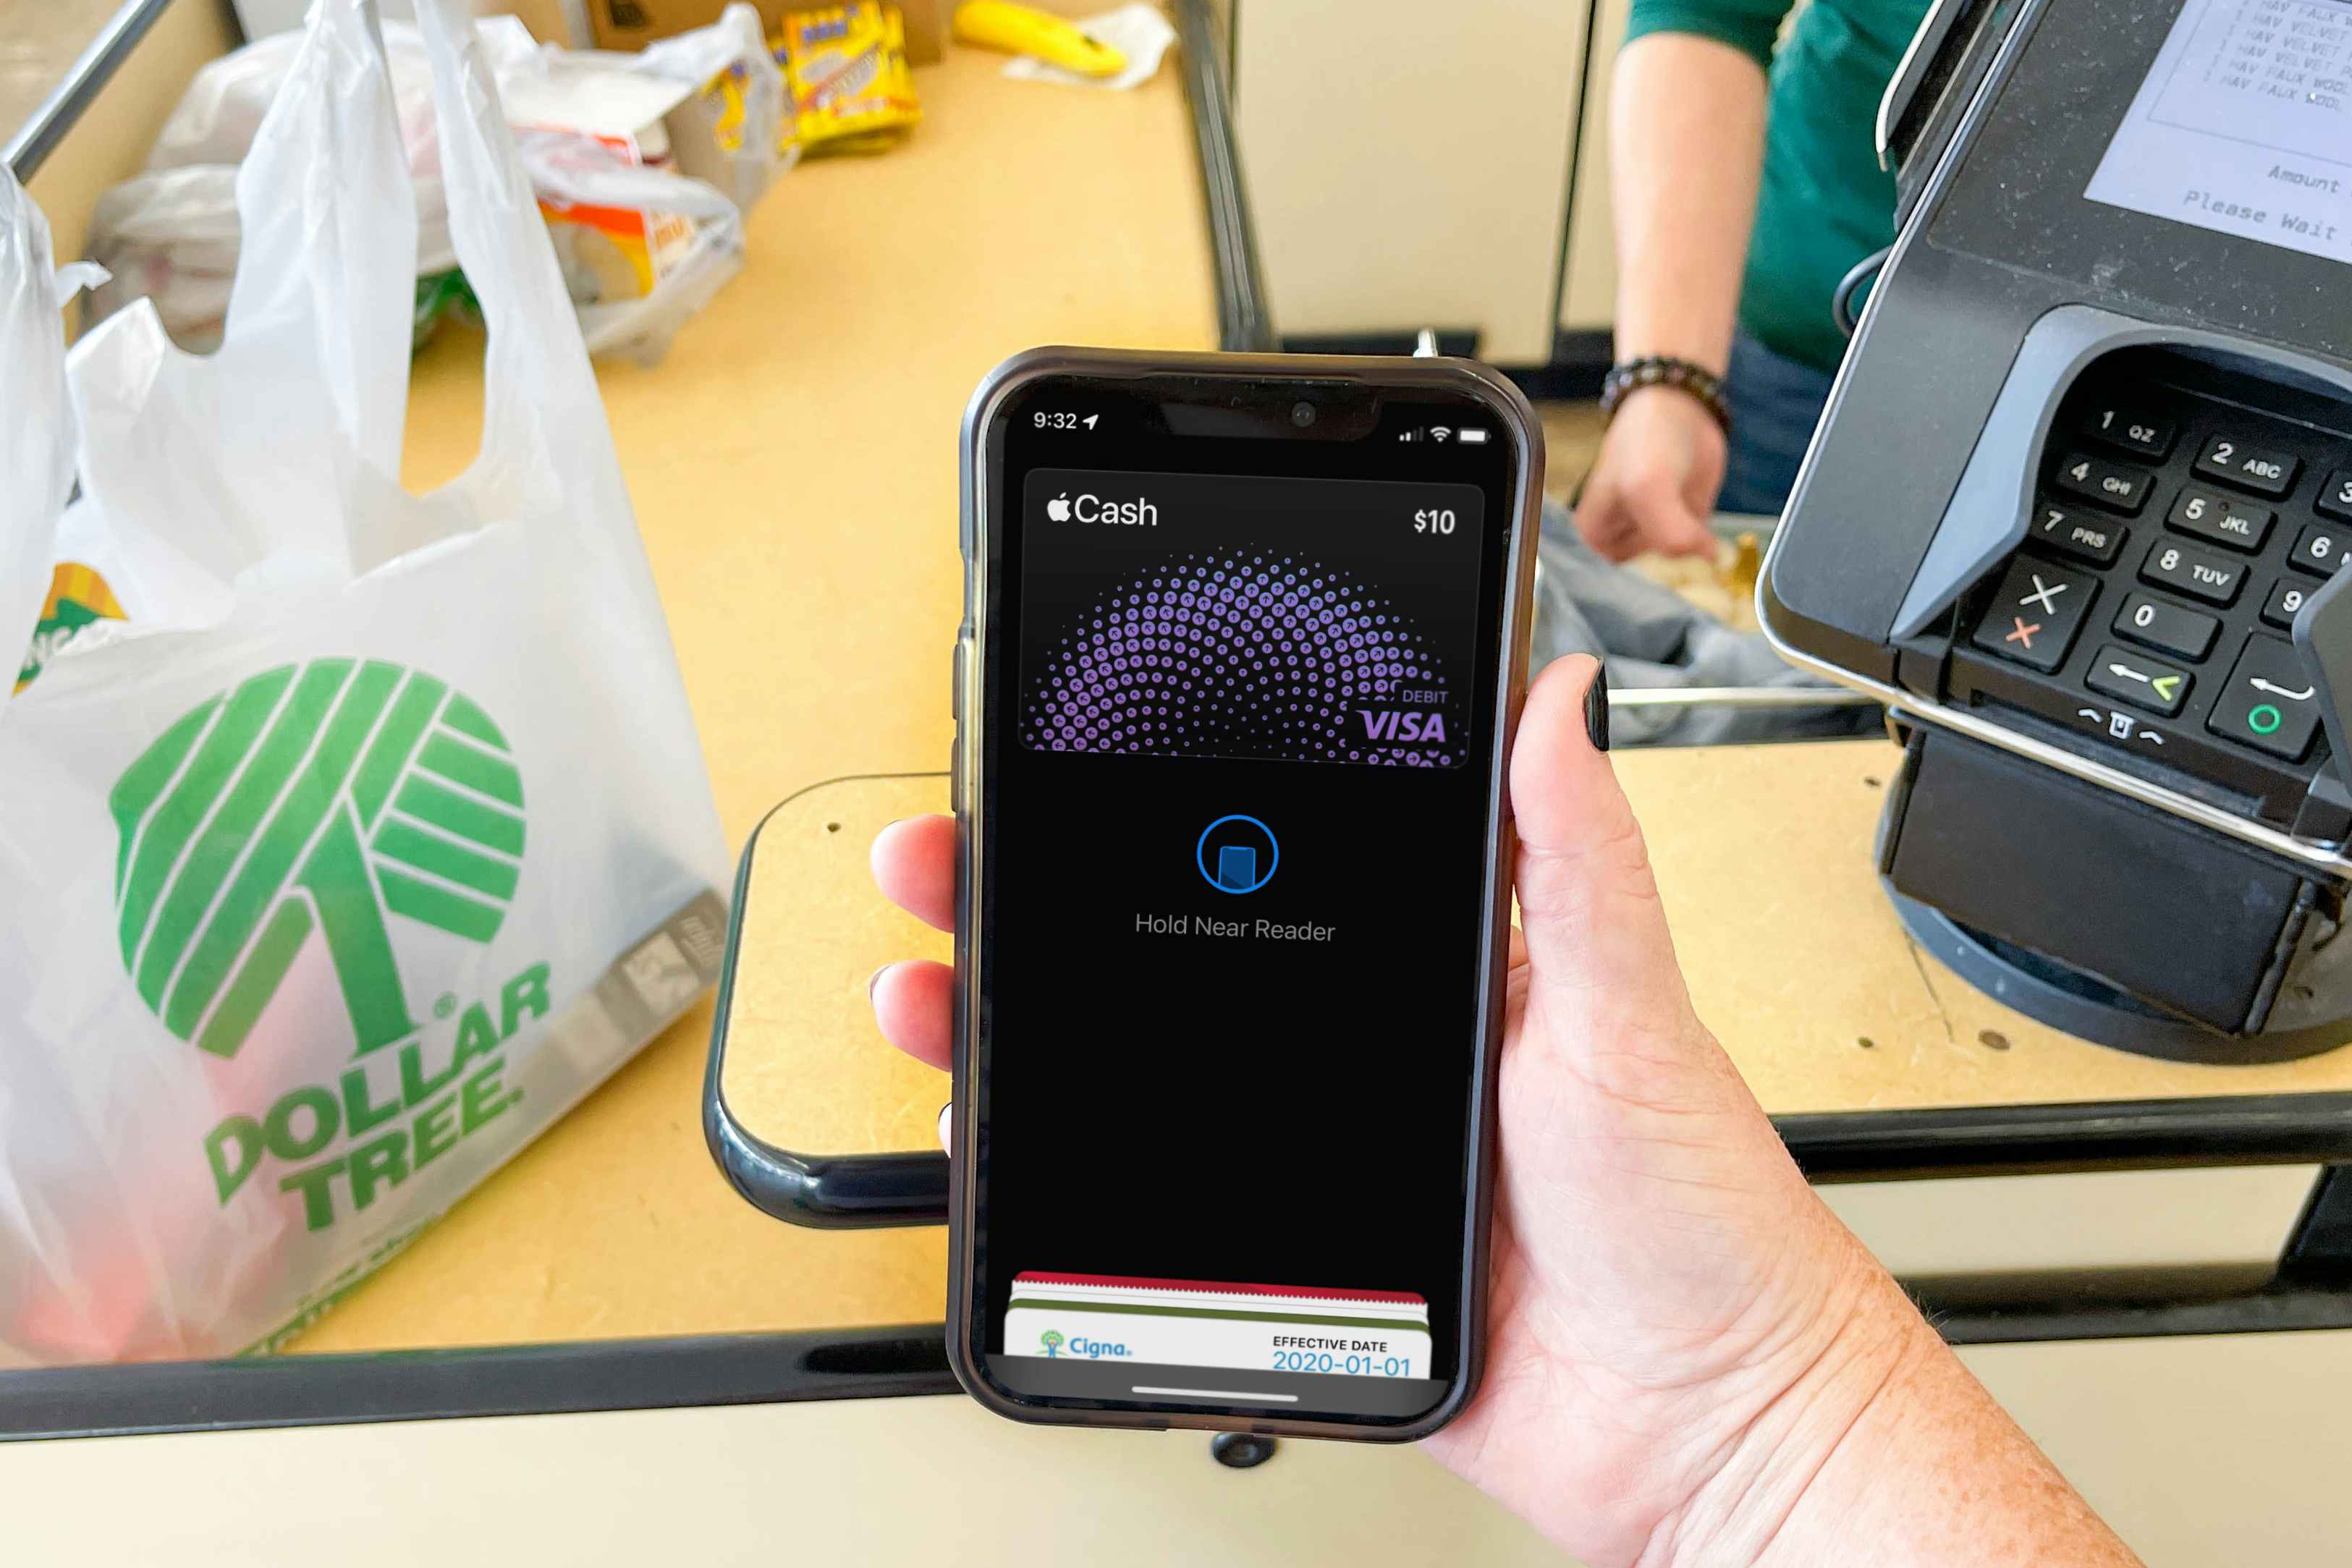 A person's hand holding a cellphone with apple pay on screen at the dollar tree register about to pay.